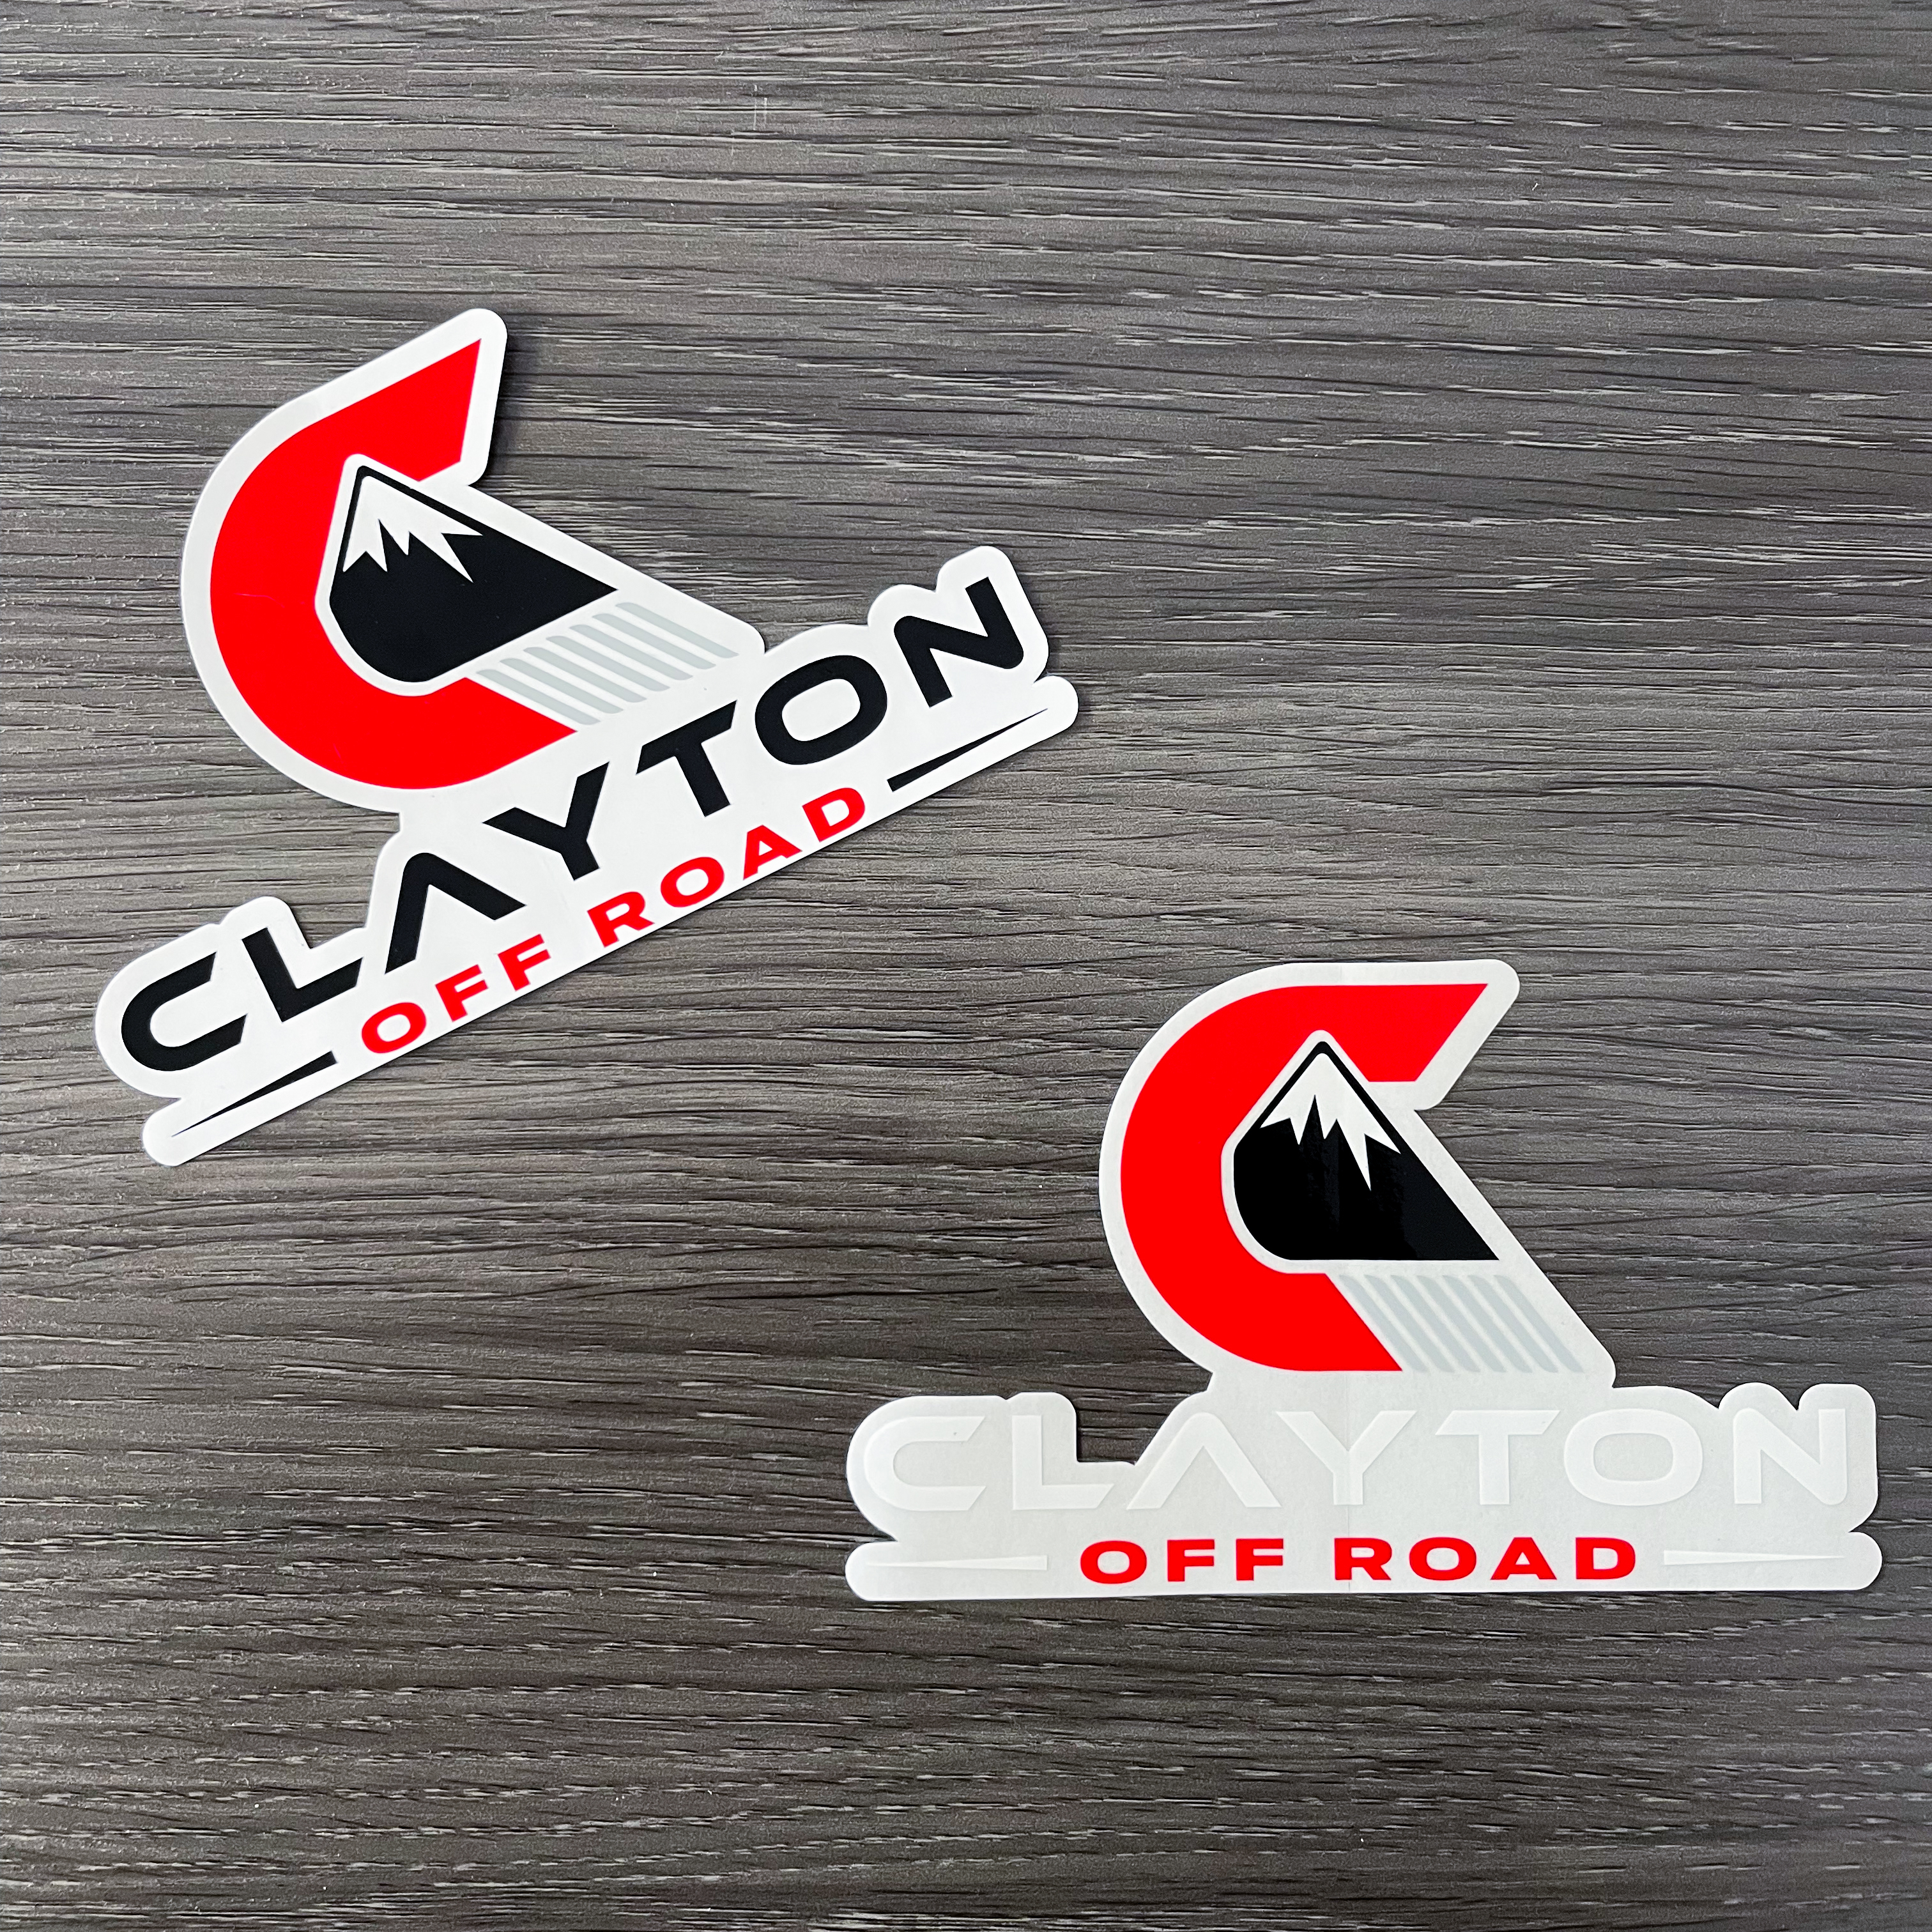 Clayton Offroad